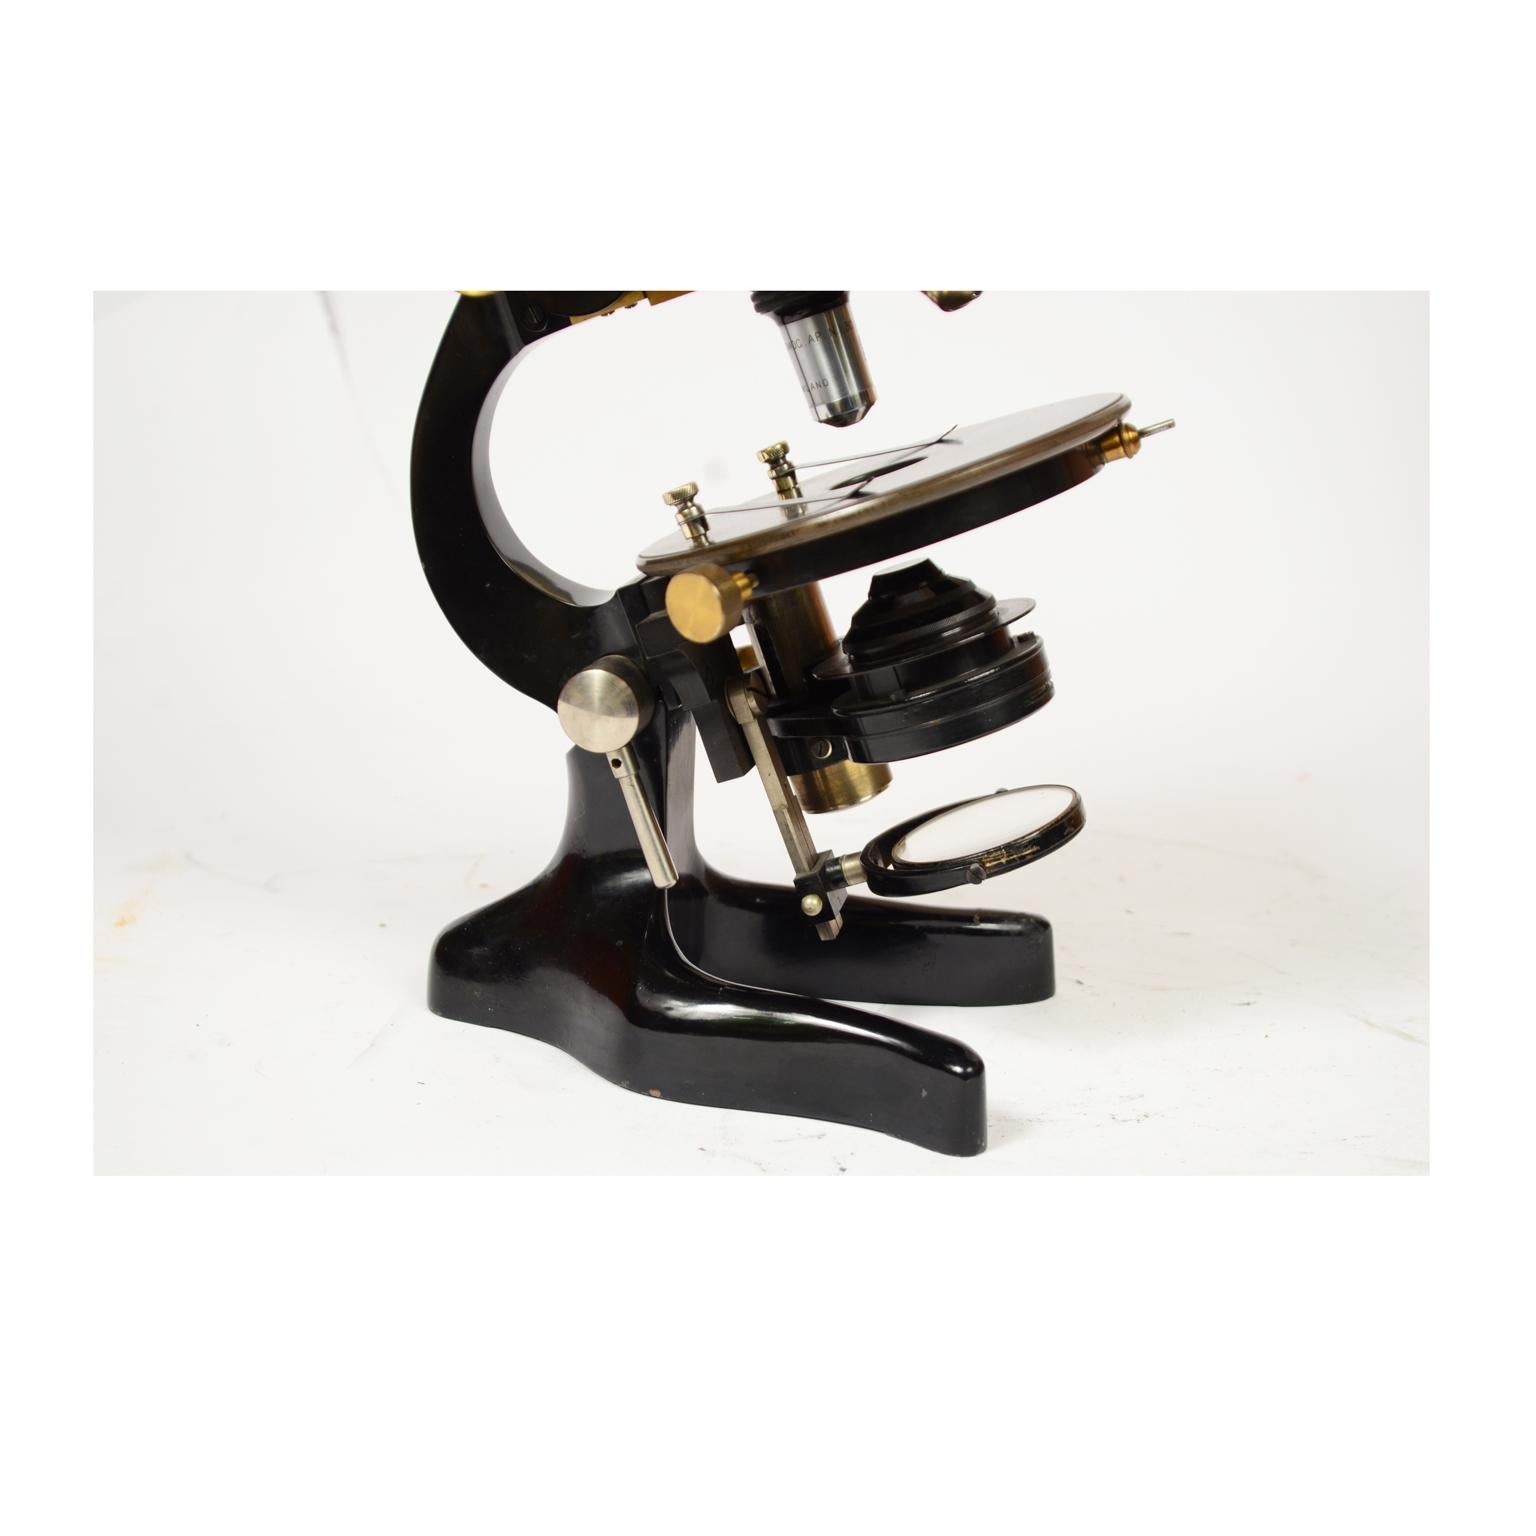 Koristka Milan Microscope Made of Black Painted Brass, Early 1900s 7